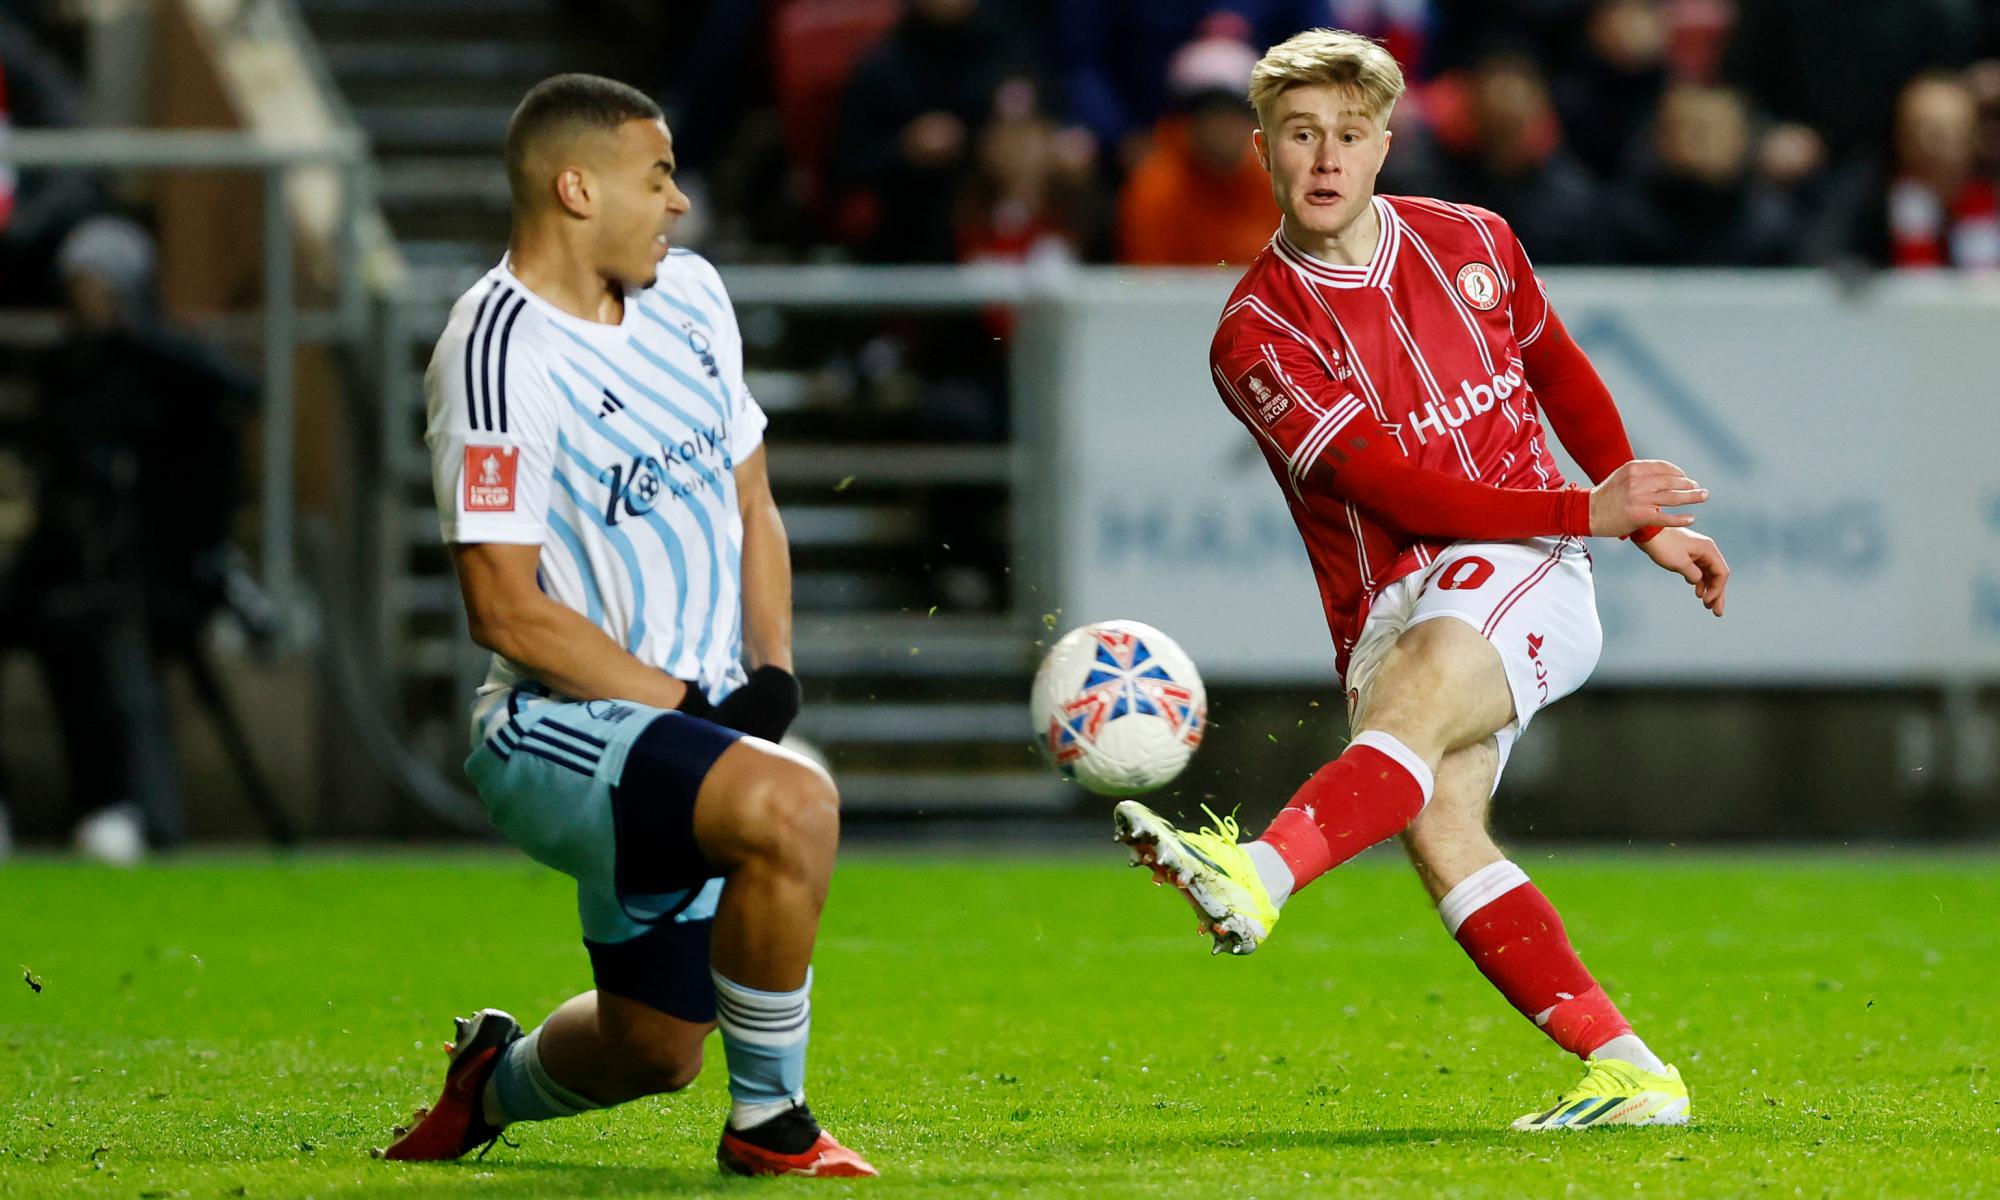 bristol city hold firm to add to toothless nottingham forest’s mounting woes